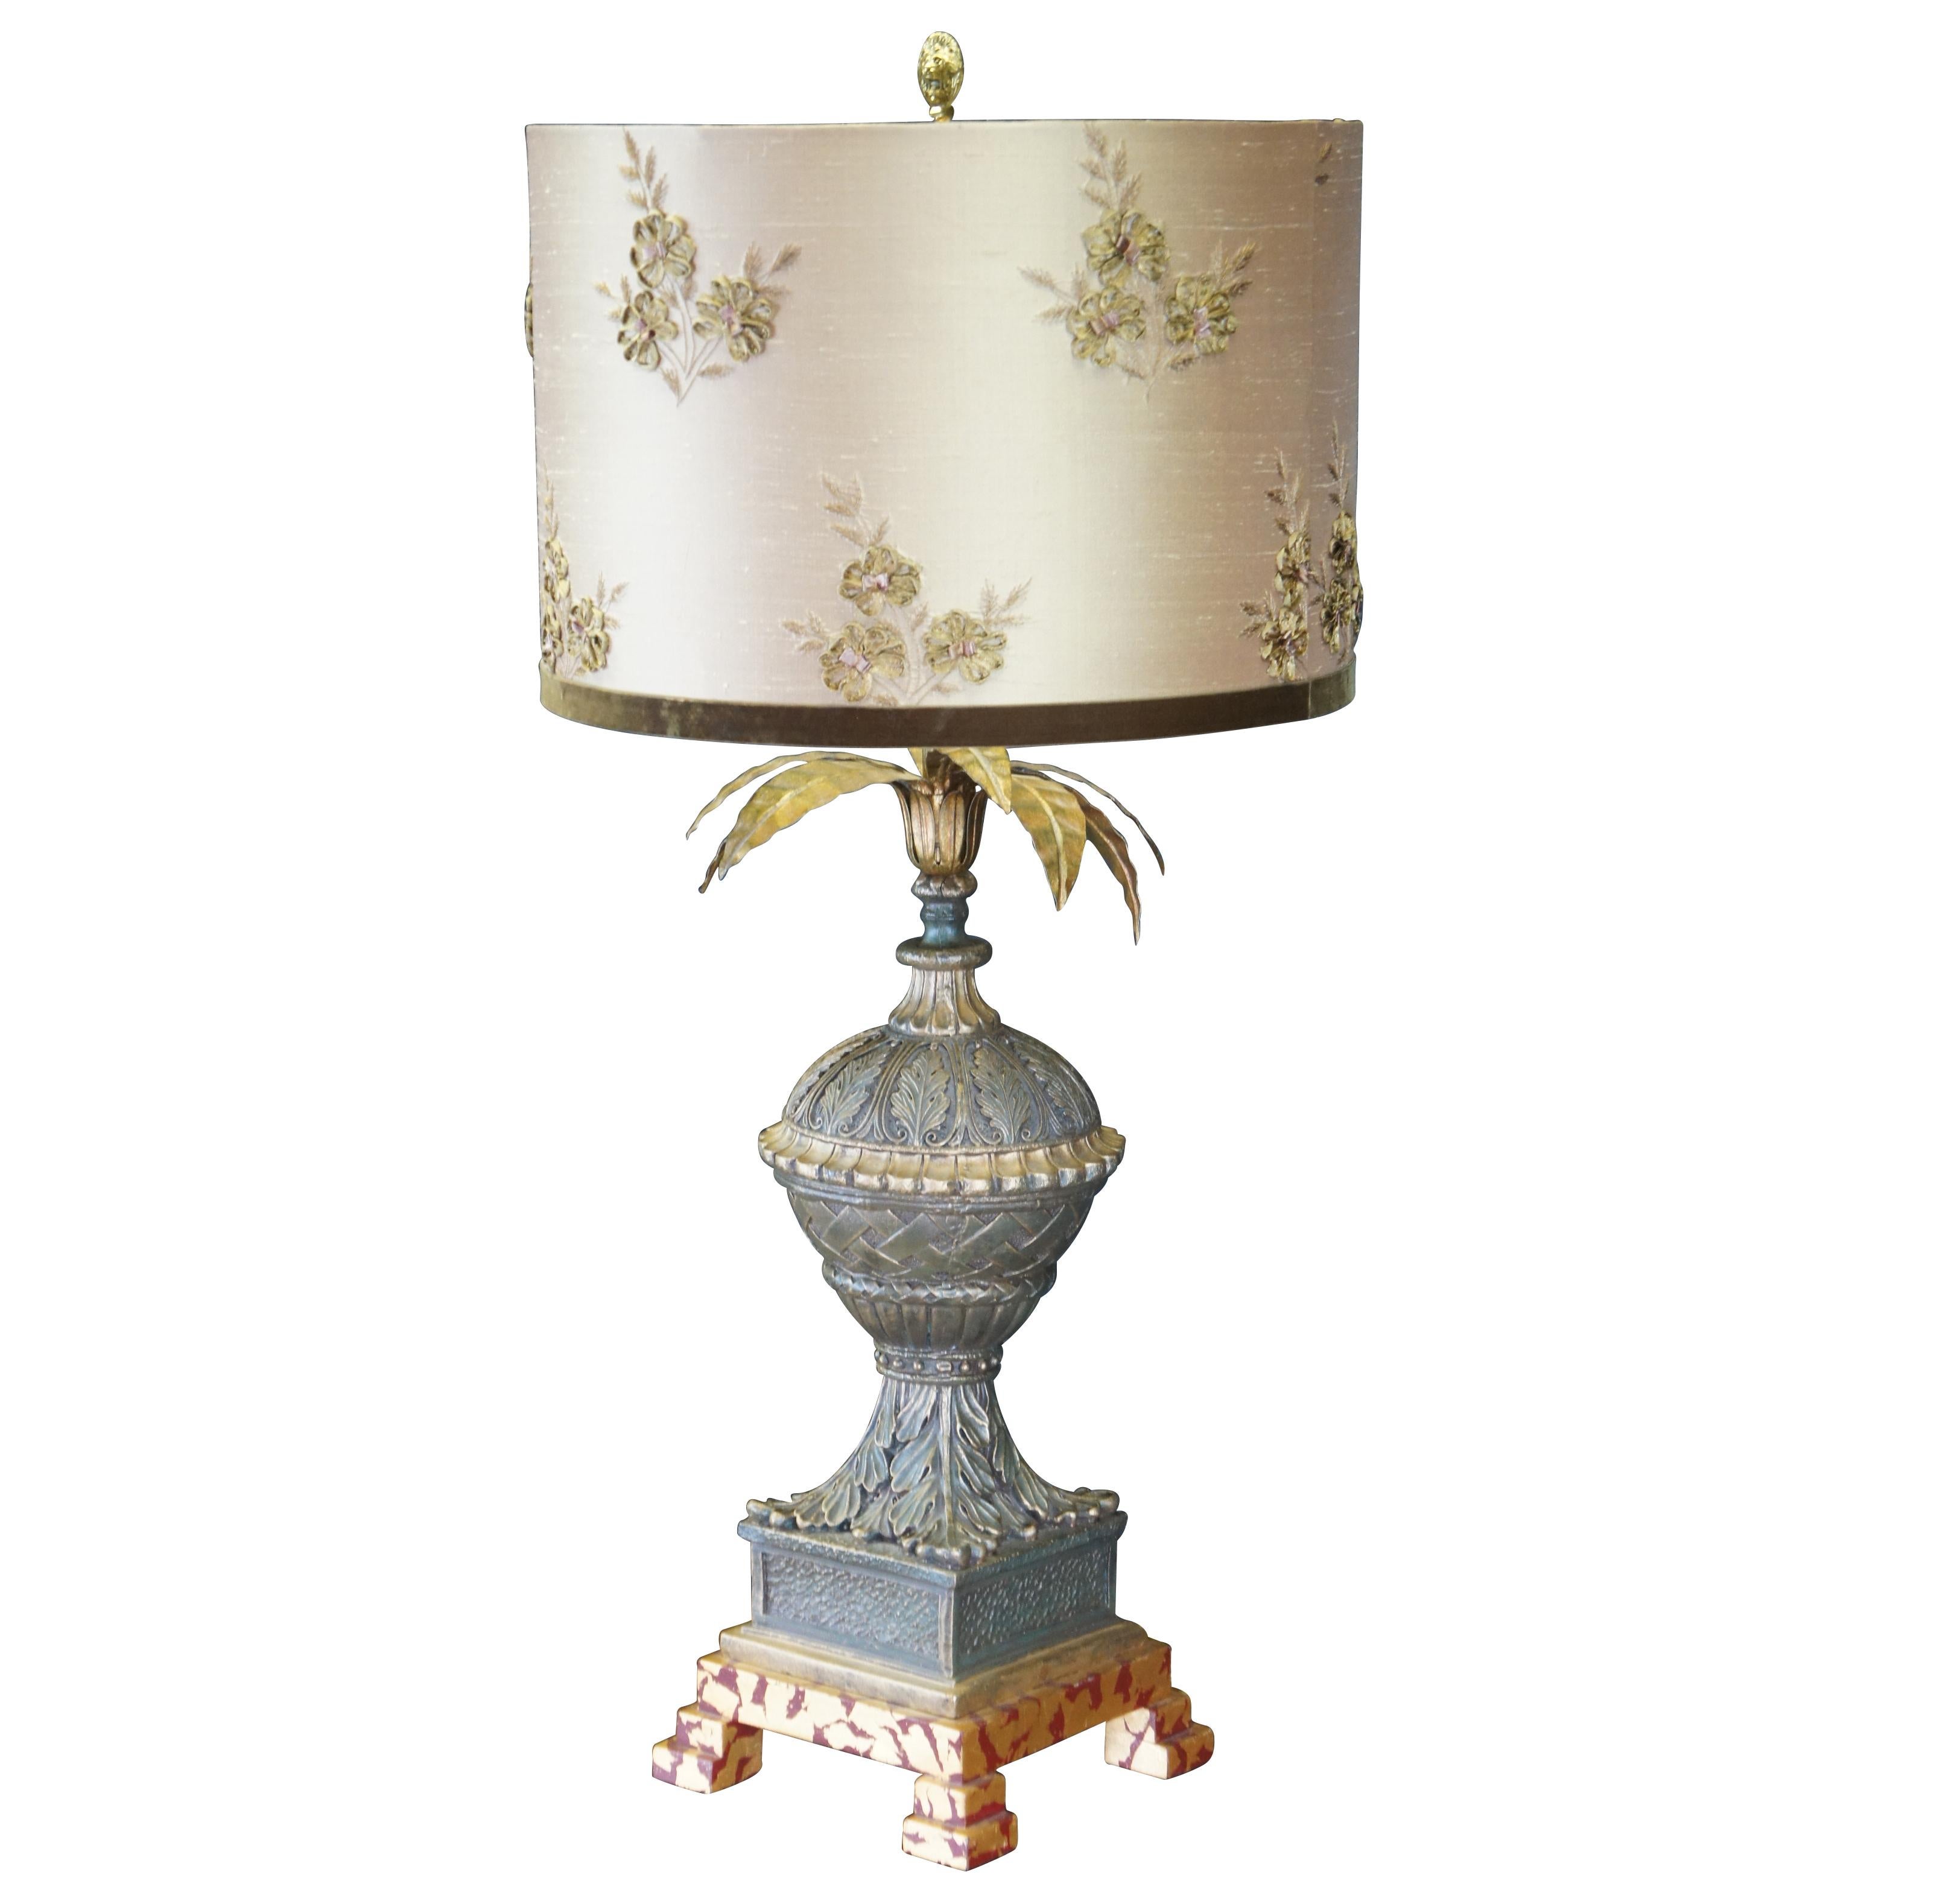 Late 20th century Frederick Cooper Buffet or table lamp.  Features an ornate base in the manner of a French urn with basketweave and acanthus design over plinth base on faux marbled footer.  The lamp has a pineapple leave topper and ornate silk drum